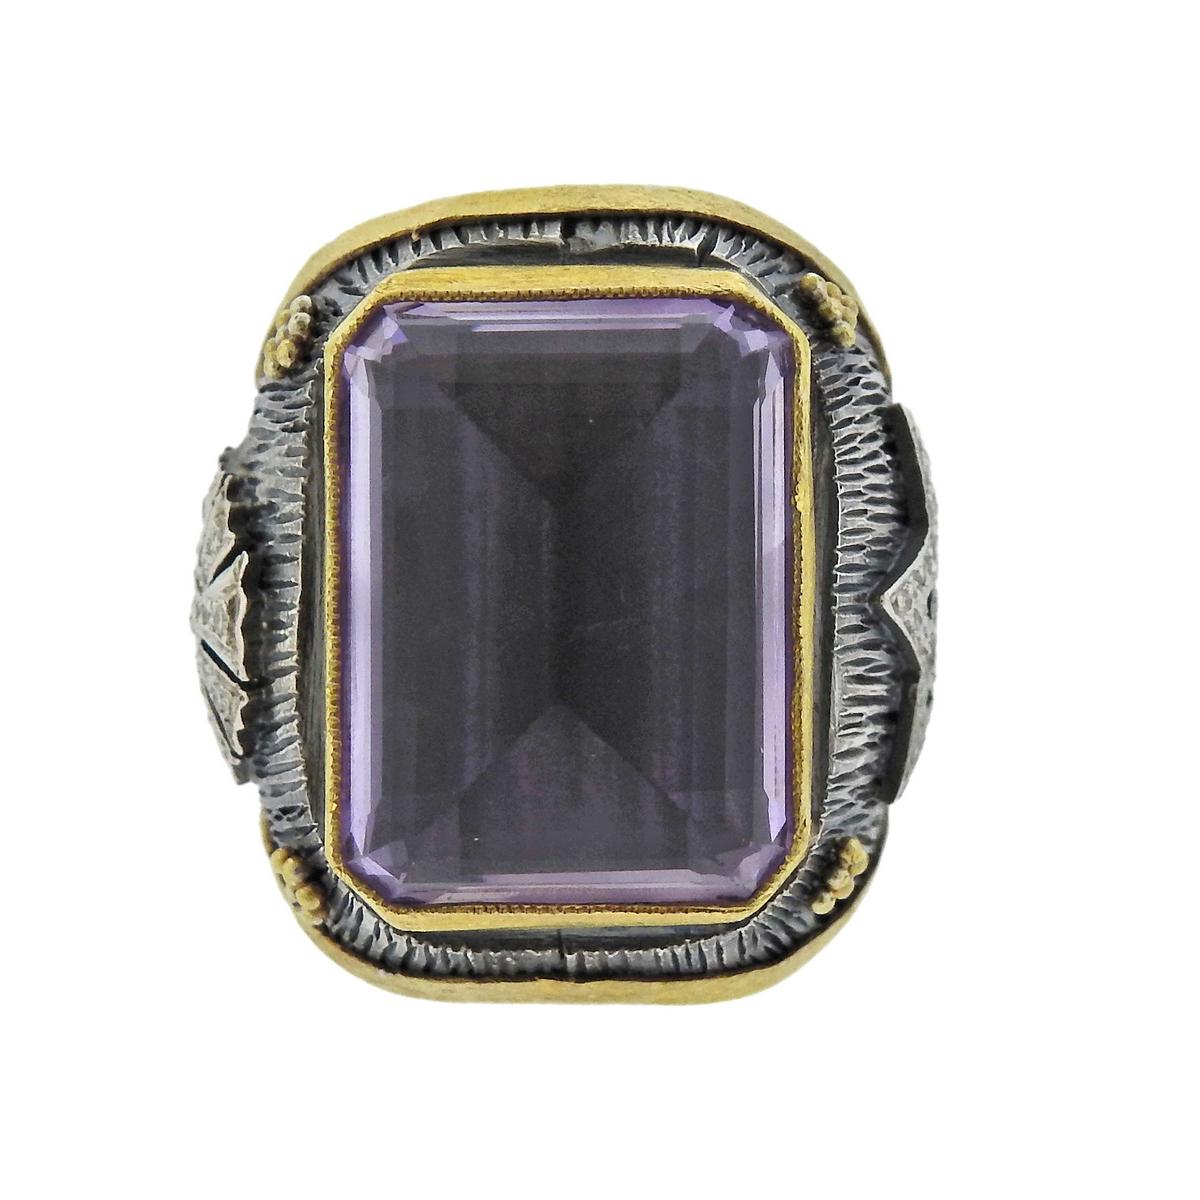 Alp Sagnak silver and 18k gold large ring, set with 19.2mm x 14.2mm amethyst, surrounded with approx. 0.22ctw in H/VS dimonds.  Ring size - 7, ring top is 26mm wide, weighs 25.5 grams. Tested silver/ 18k.  Designer is known not to mark all of his